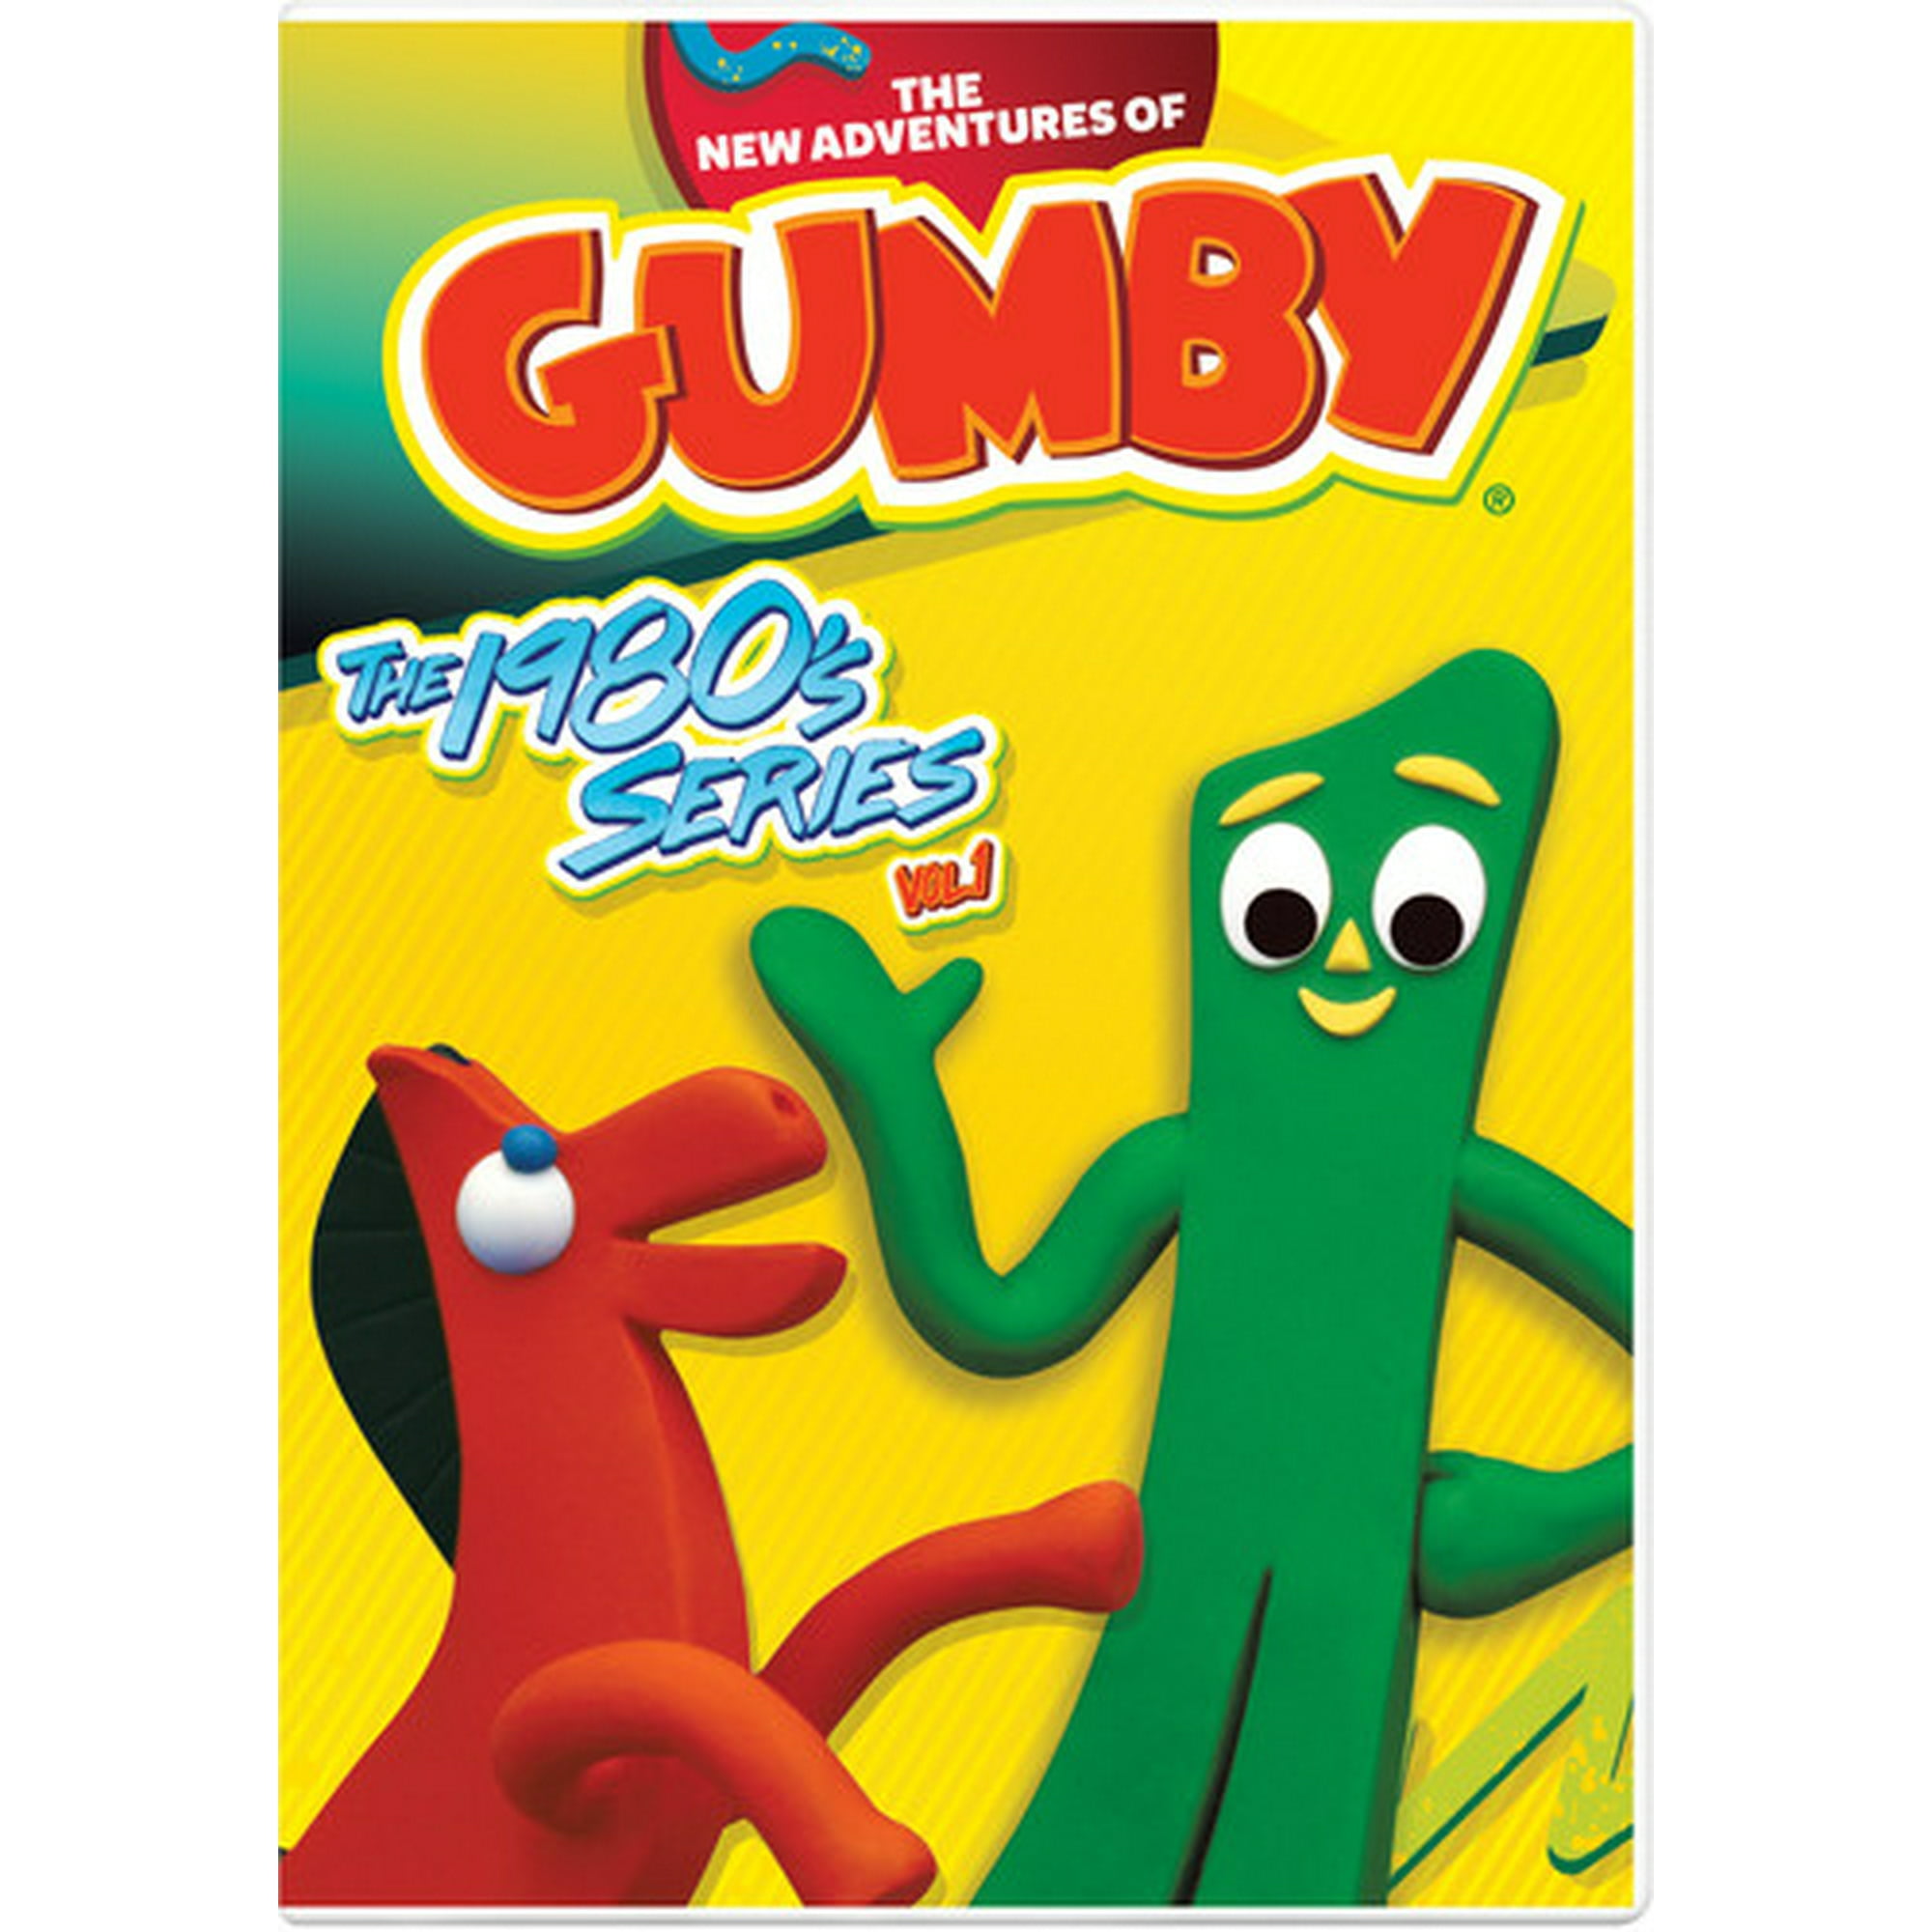 DISTRIBUTION SOLUTIONS GUMBY-NEW ADVENTURES OF GUMBY-80S SERIES VOL 1 (DVD)  D101009D | Walmart Canada